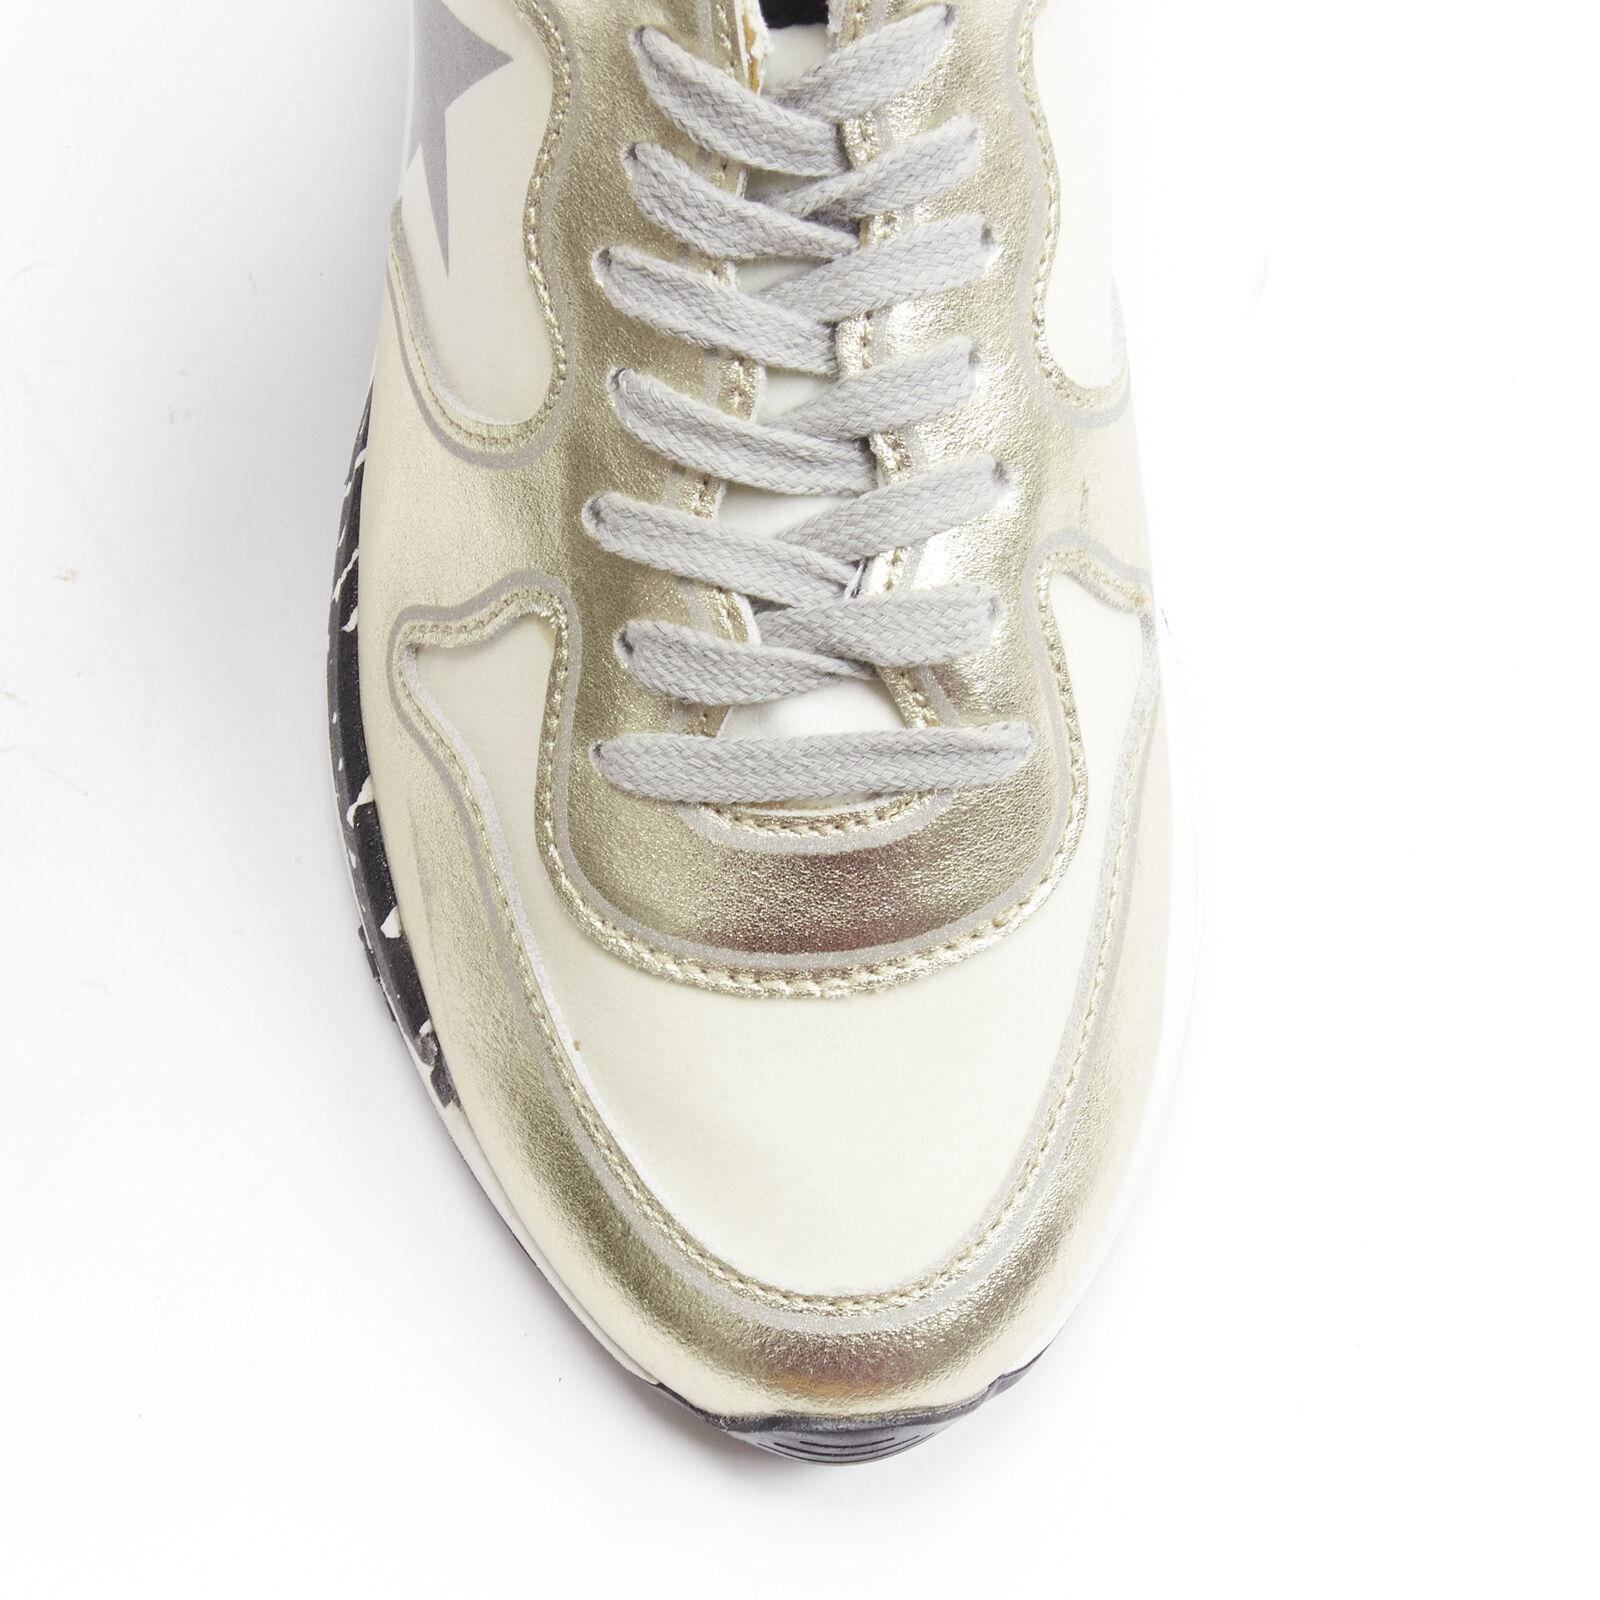 GOLDEN GOOSE Private EDT Running chunky metallic gold distressed sneaker EU38 For Sale 1